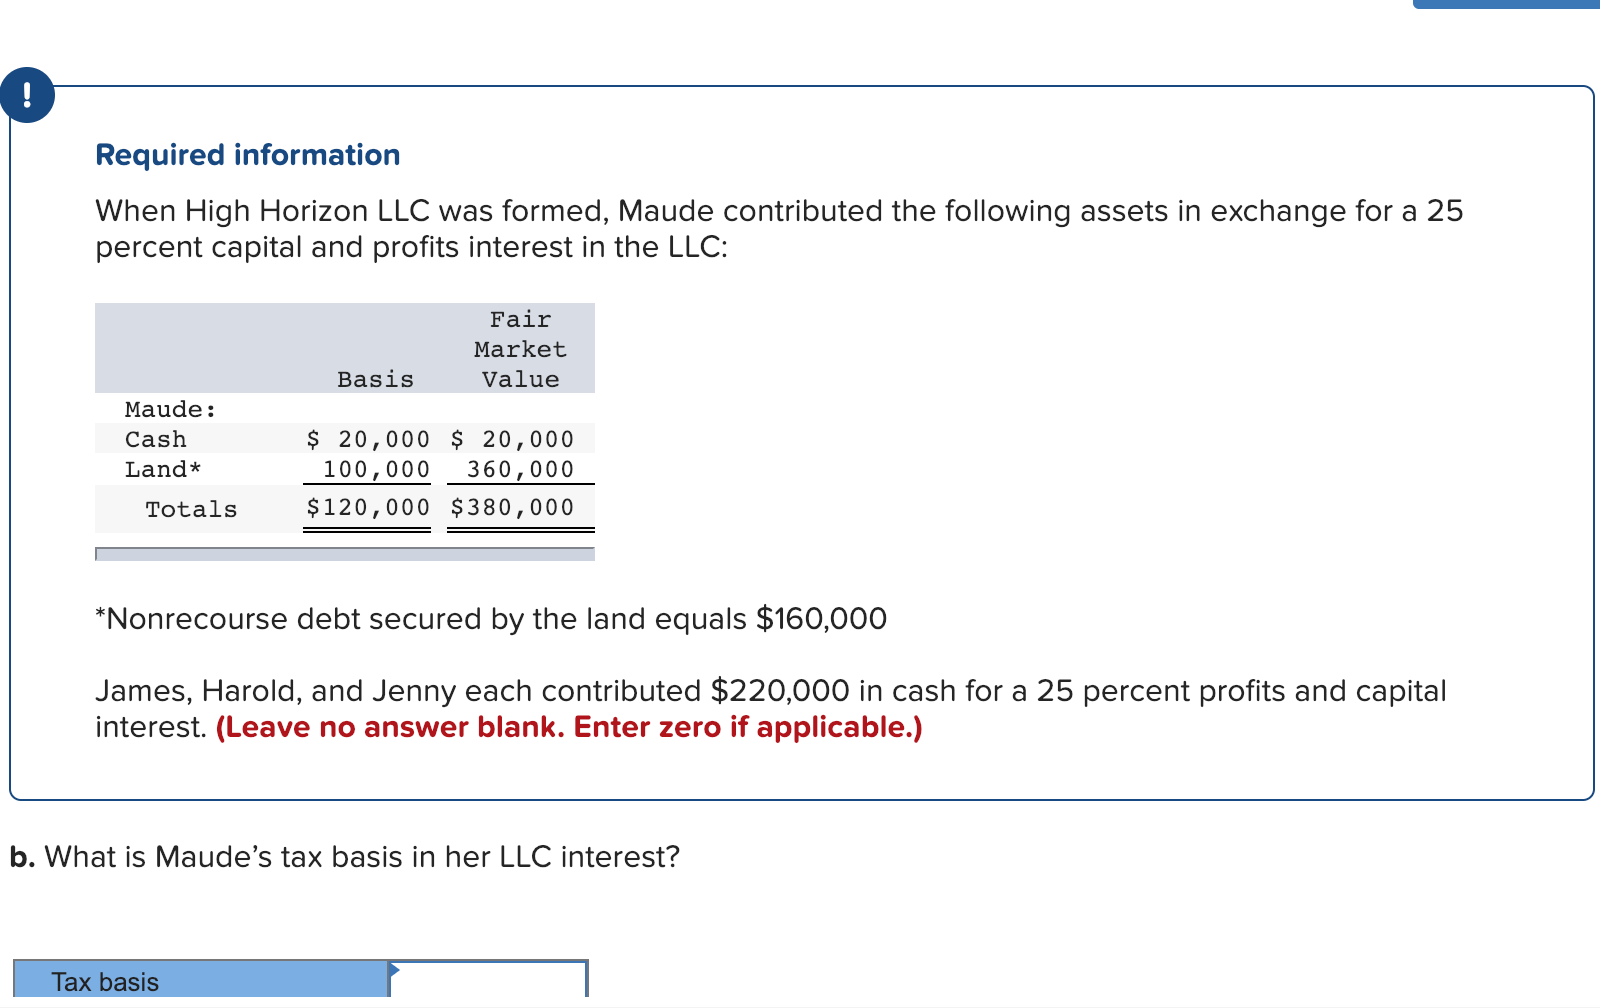 Required information
When High Horizon LLC was formed, Maude contributed the following assets in exchange for a 25
percent capital and profits interest in the LLC:
Fair
Market
Value
Basis
Maude:
Cash
Land*
$ 20,000 $ 20,000
100,000 360,000
Totals
$120,000 $380,000
Nonrecourse debt secured by the land equals $160,000
James, Harold, and Jenny each contributed $220,000 in cash for a 25 percent profits and capital
interest. (Leave no answer blank. Enter zero if applicable.)
b. What is Maude's tax basis in her LLC interest?
Tax basis
